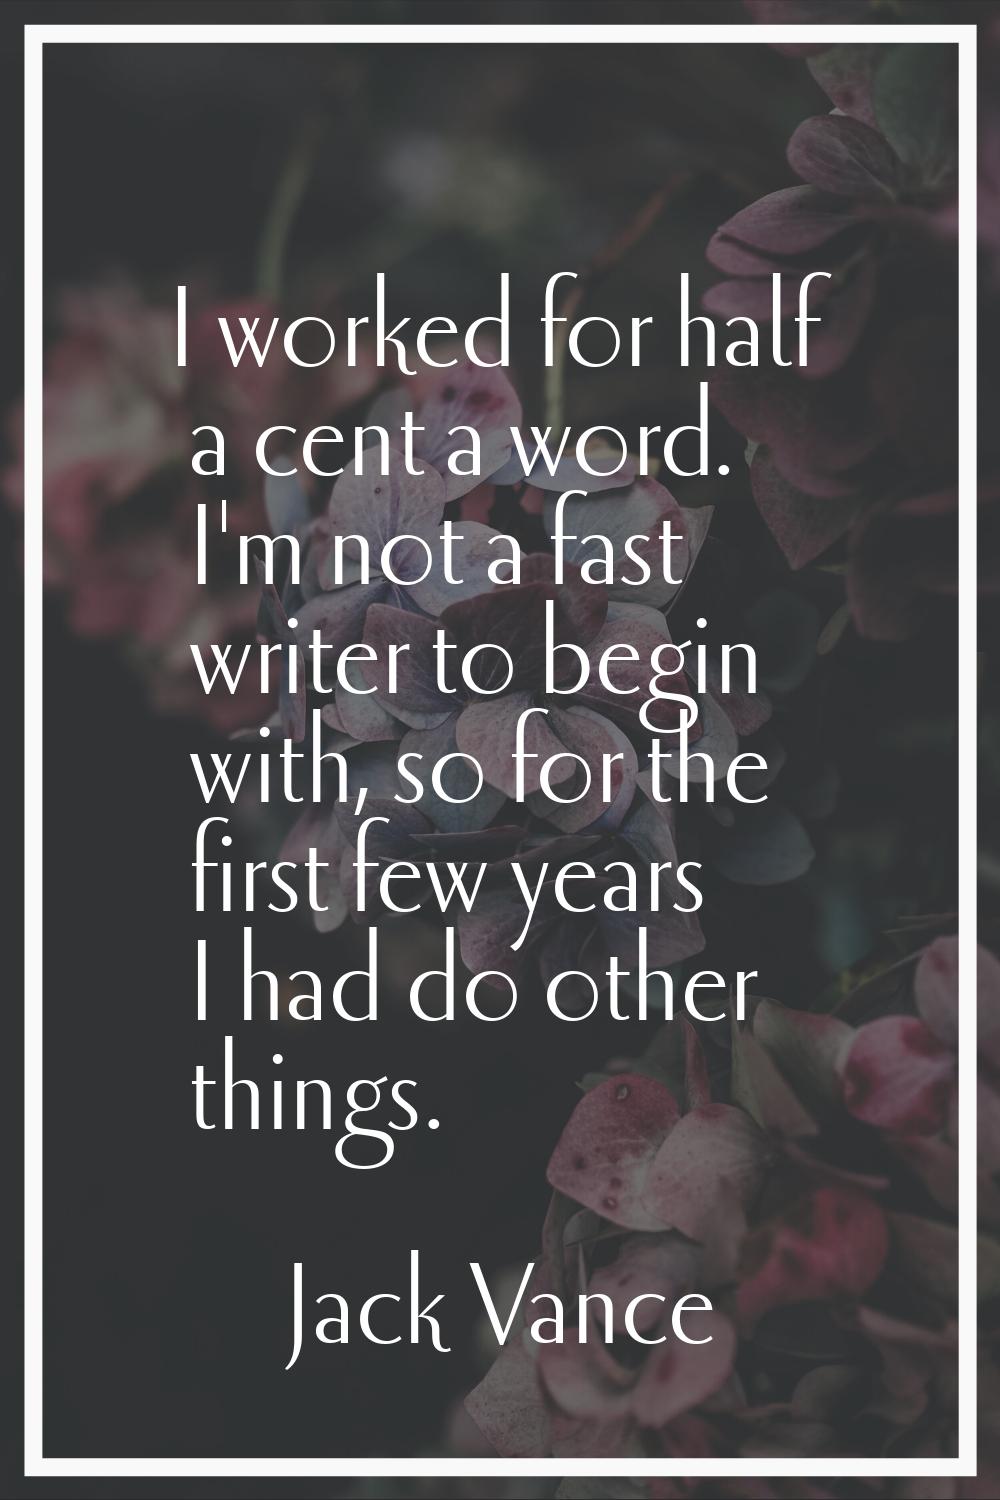 I worked for half a cent a word. I'm not a fast writer to begin with, so for the first few years I 